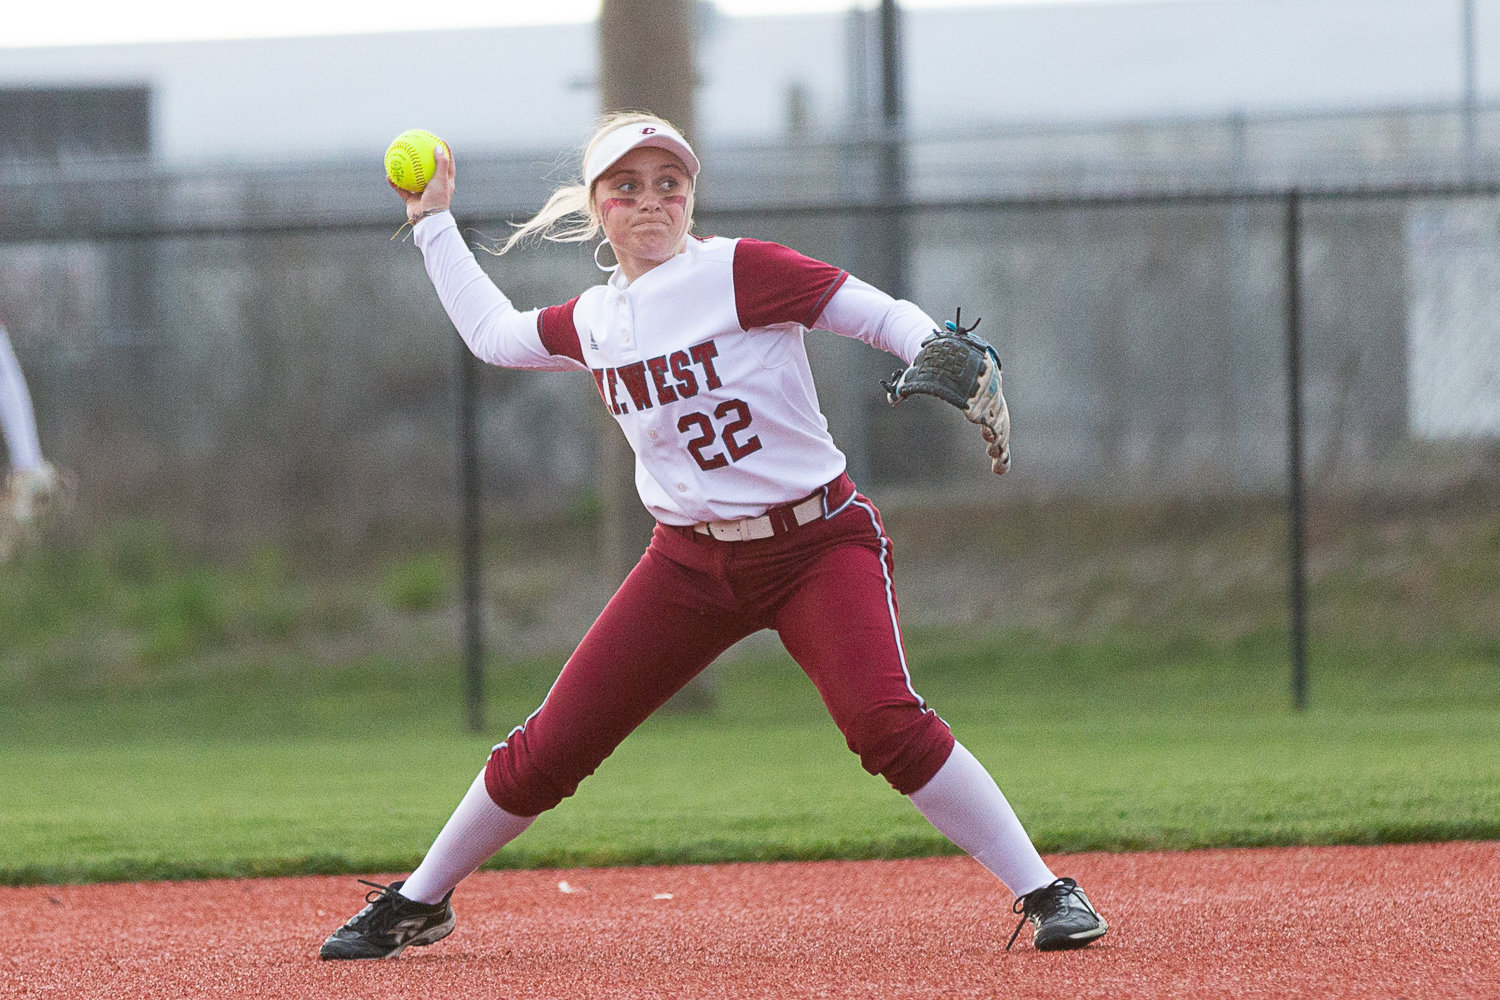 Avalon Myers throws to first for an out during W.F. West's 3-2 win over Tumwater on March 22.